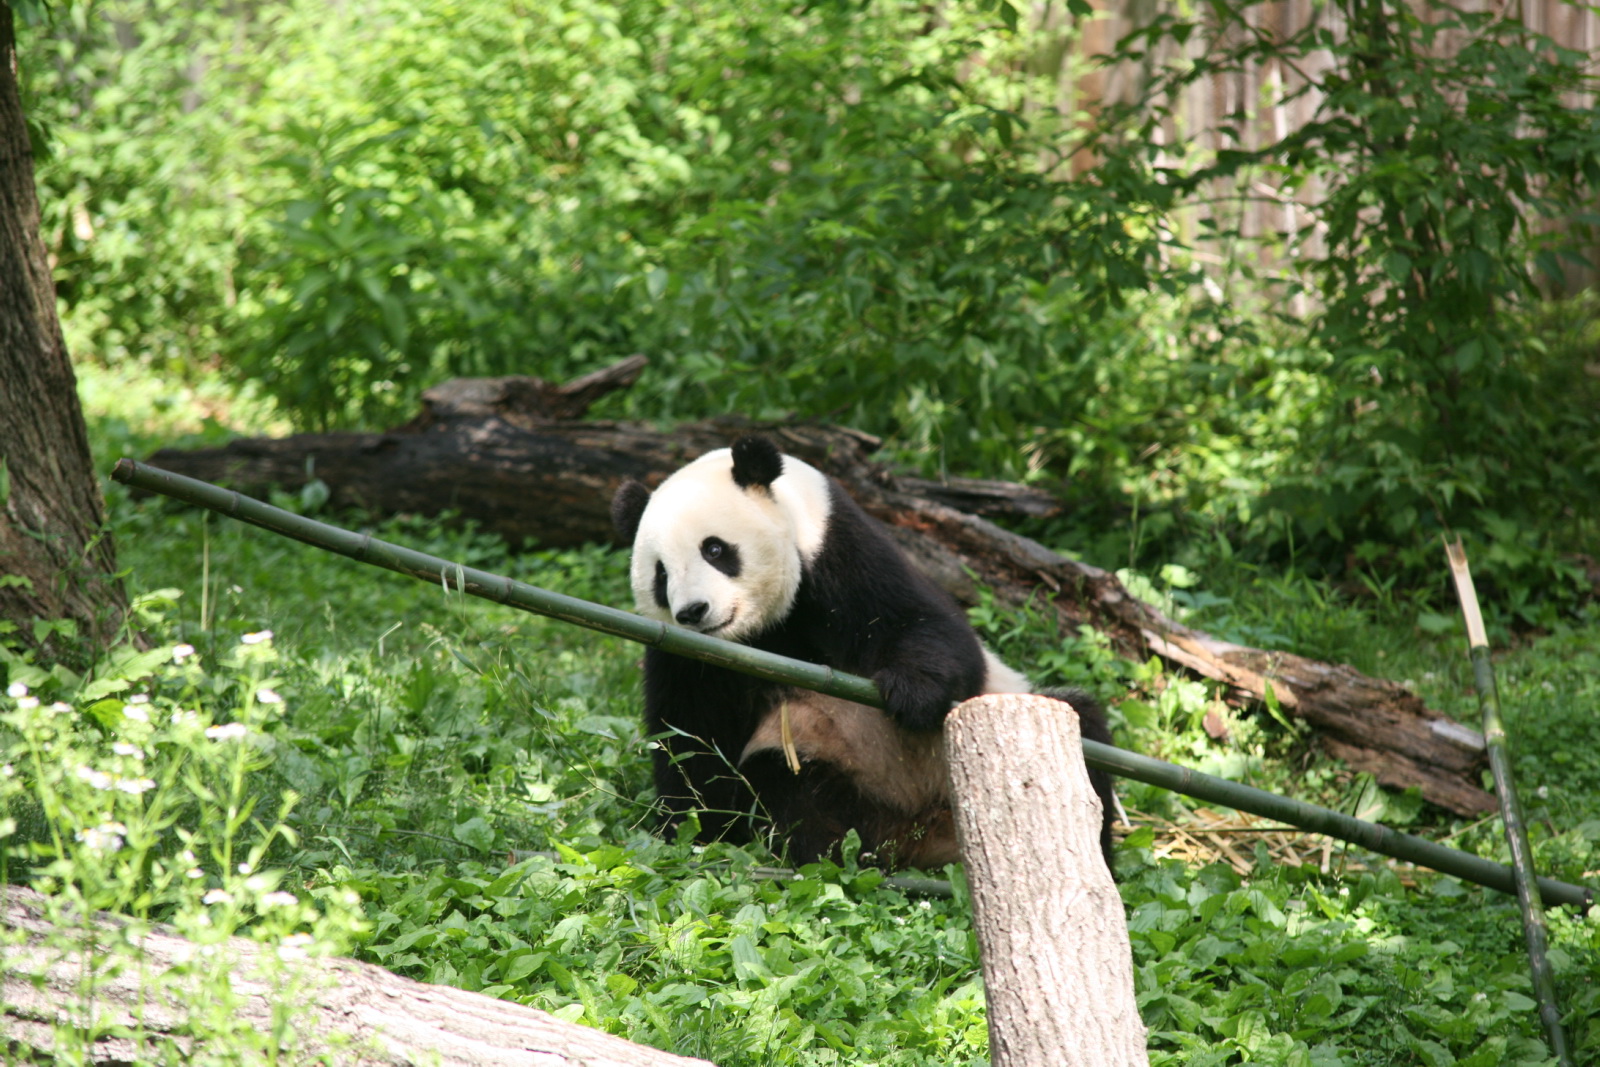 a panda bear sitting behind a wooden post in a grassy area